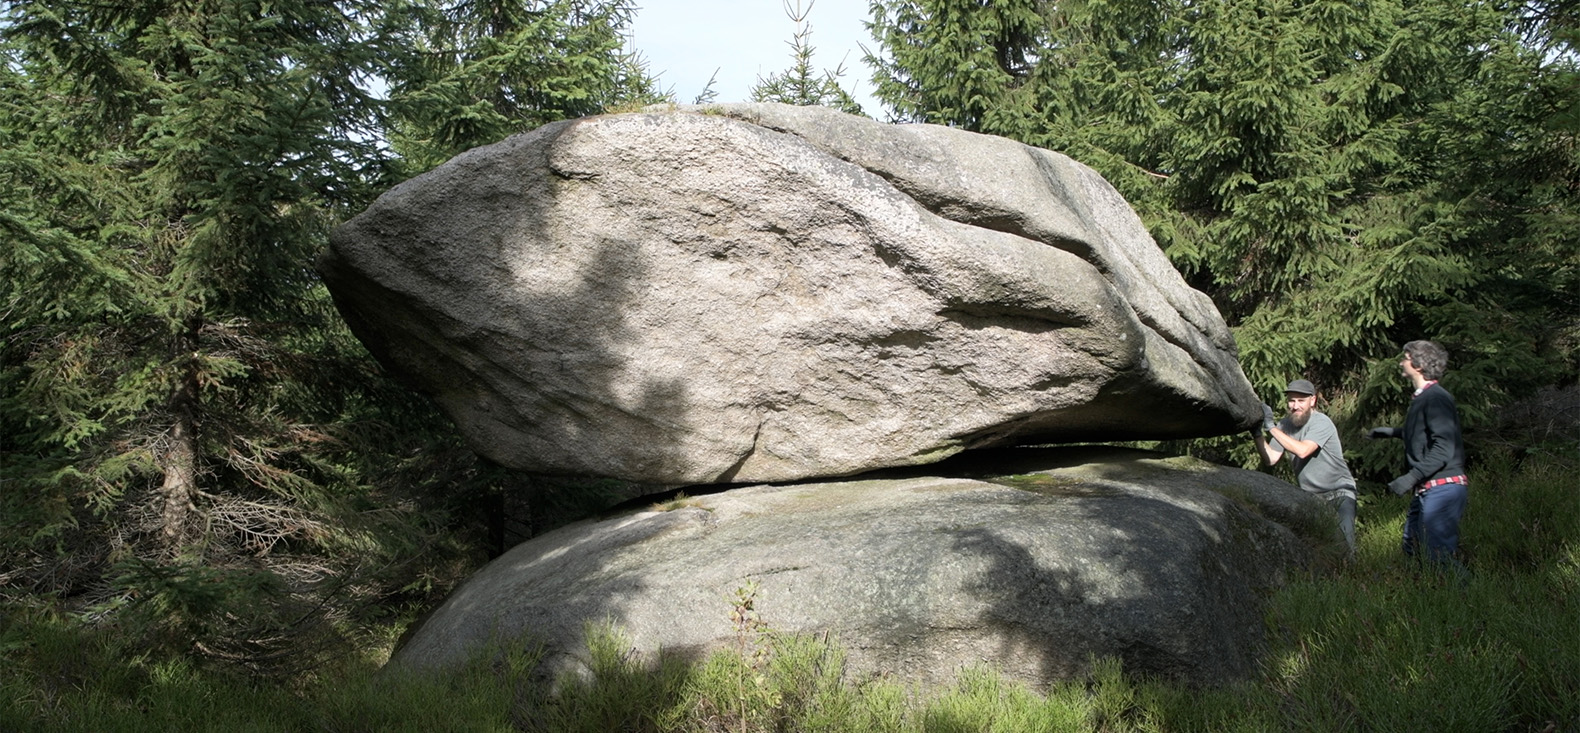 Metastabli: In the picture you can see a wooded environment, in the center of the picture you can see a large stone balancing on another one. To the right of the stones you can see the two artists rocking the upper stone.